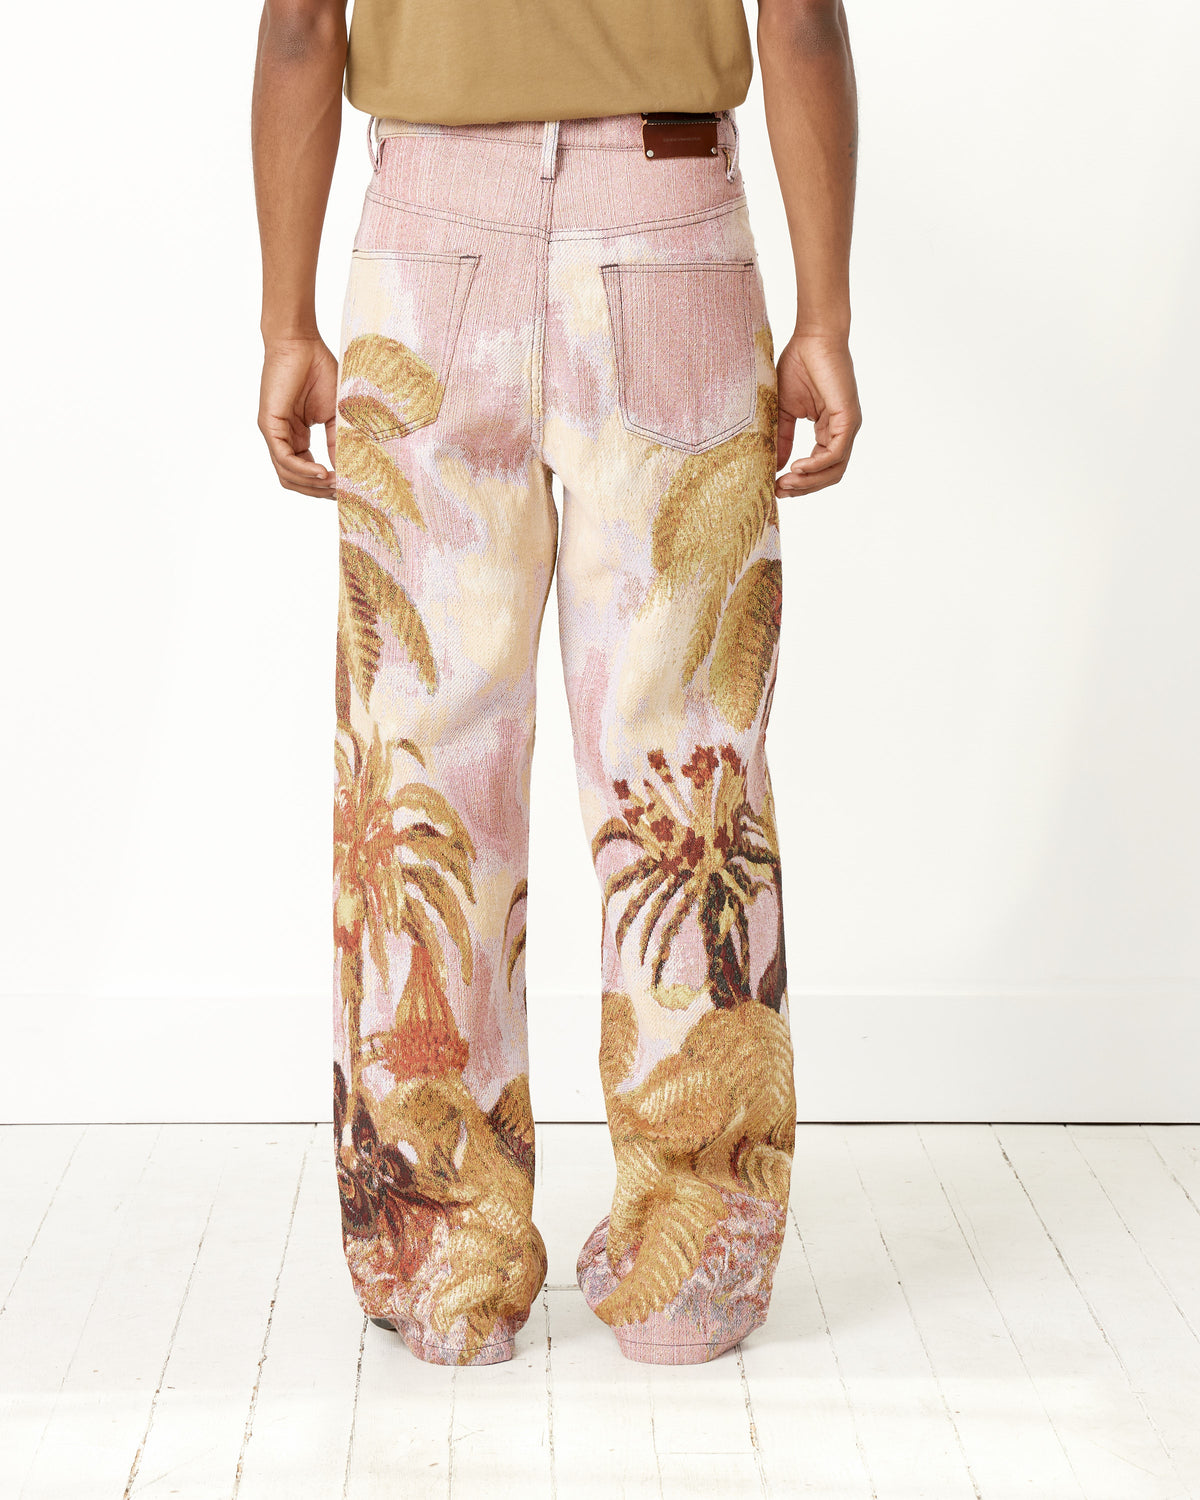 Cotton Jacquard Pant Dries Van Noten is offered at an affordable